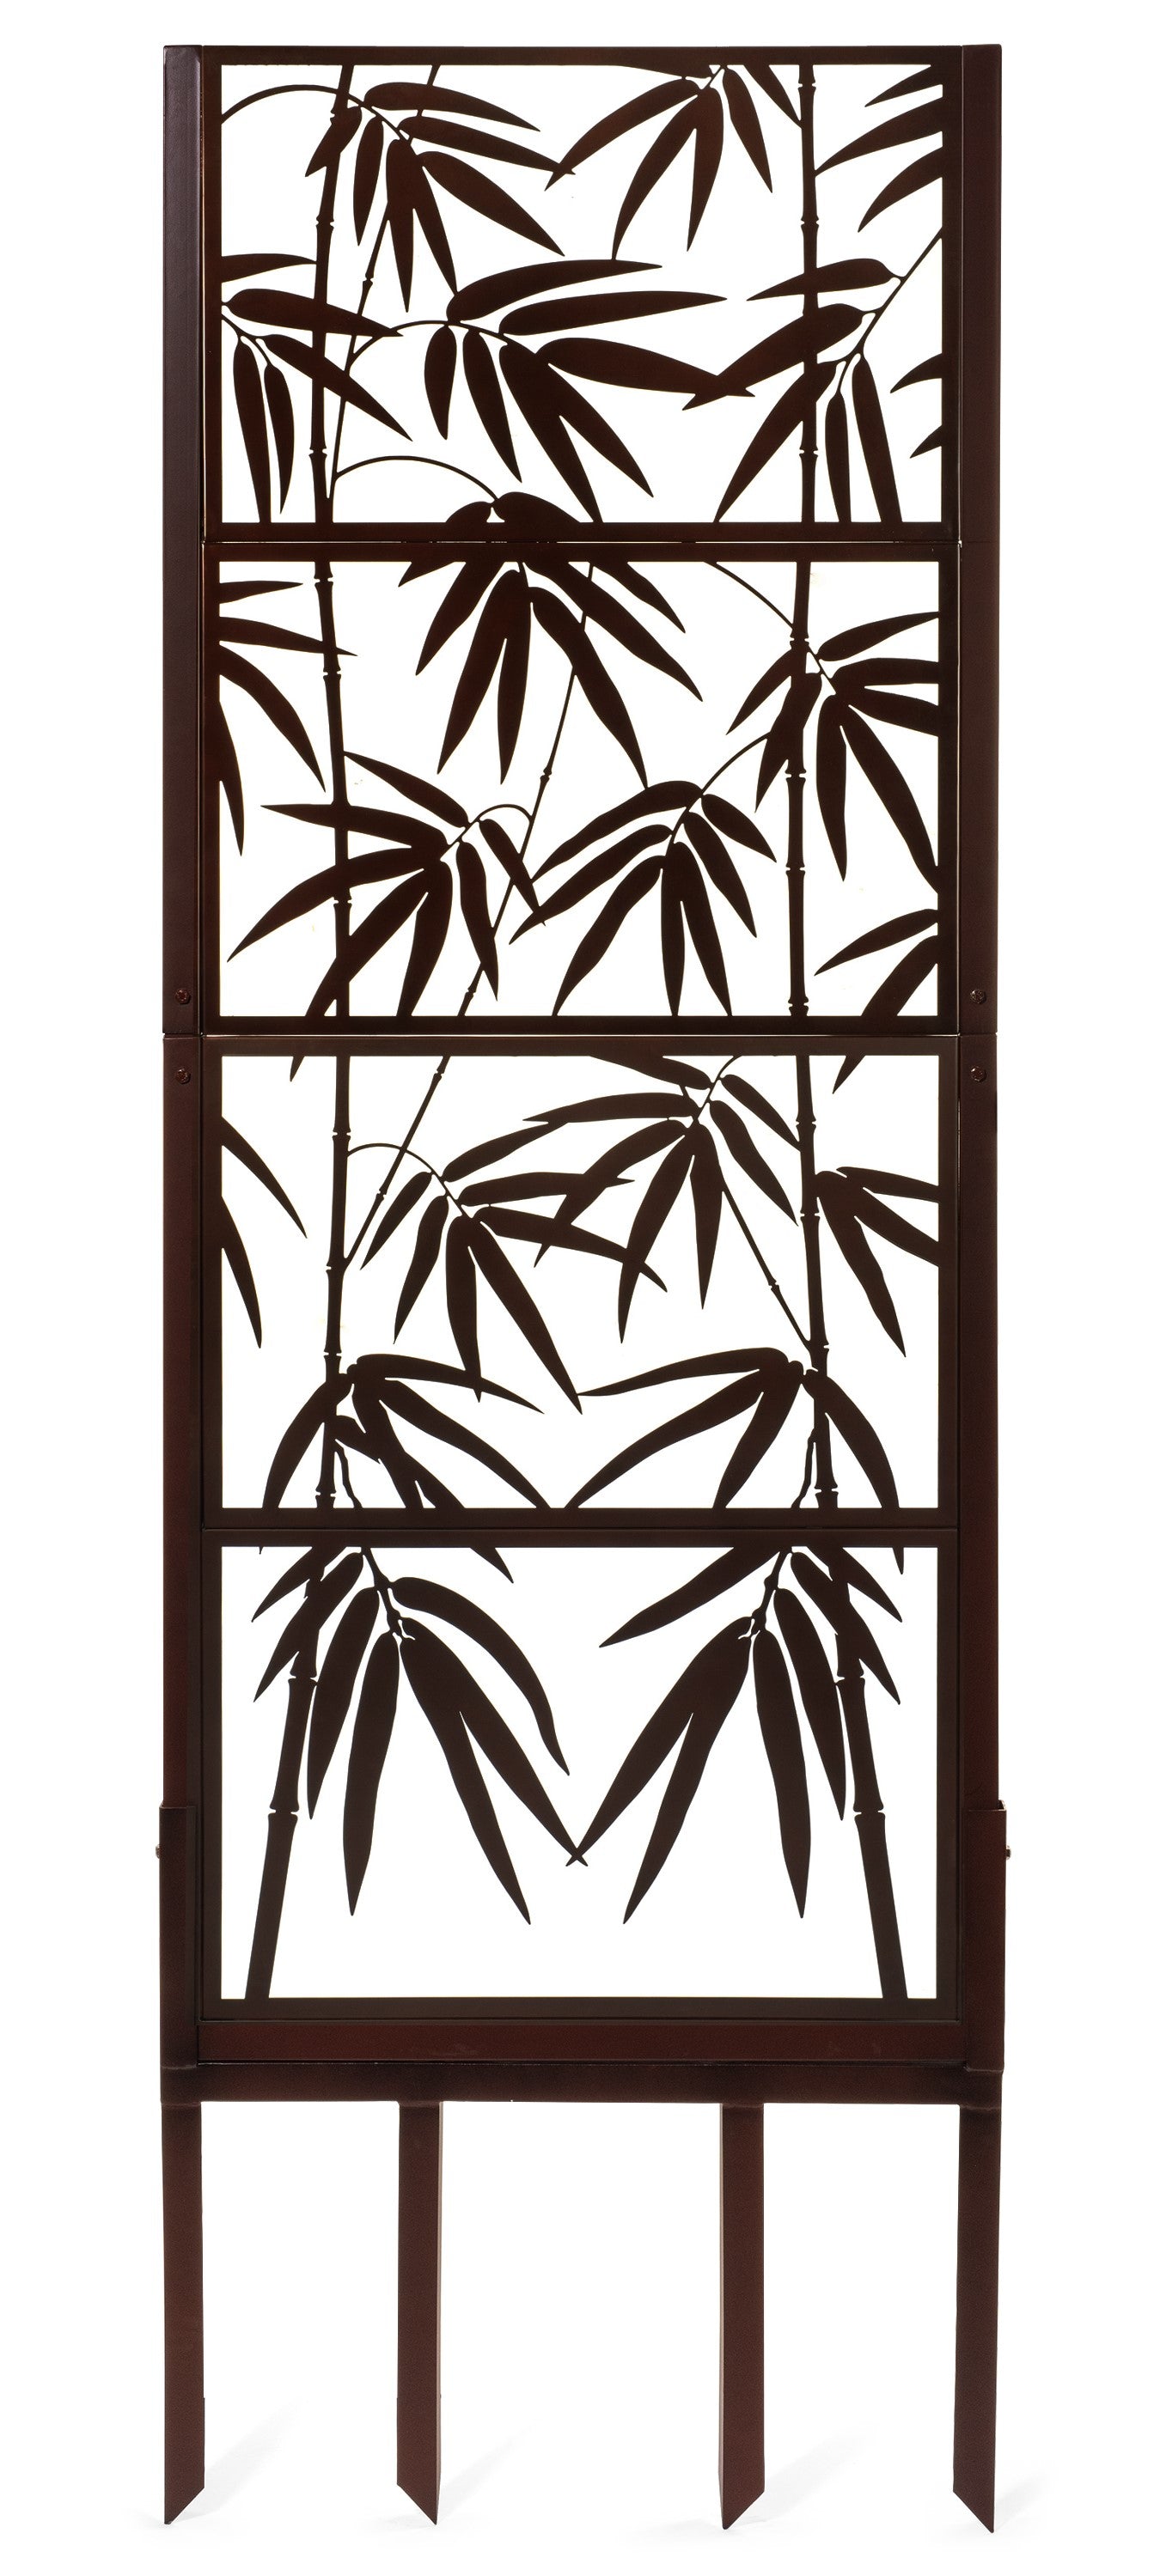 H Potter Garden Trellis Screen Privacy for Patio Deck Balcony with Ground Spikes